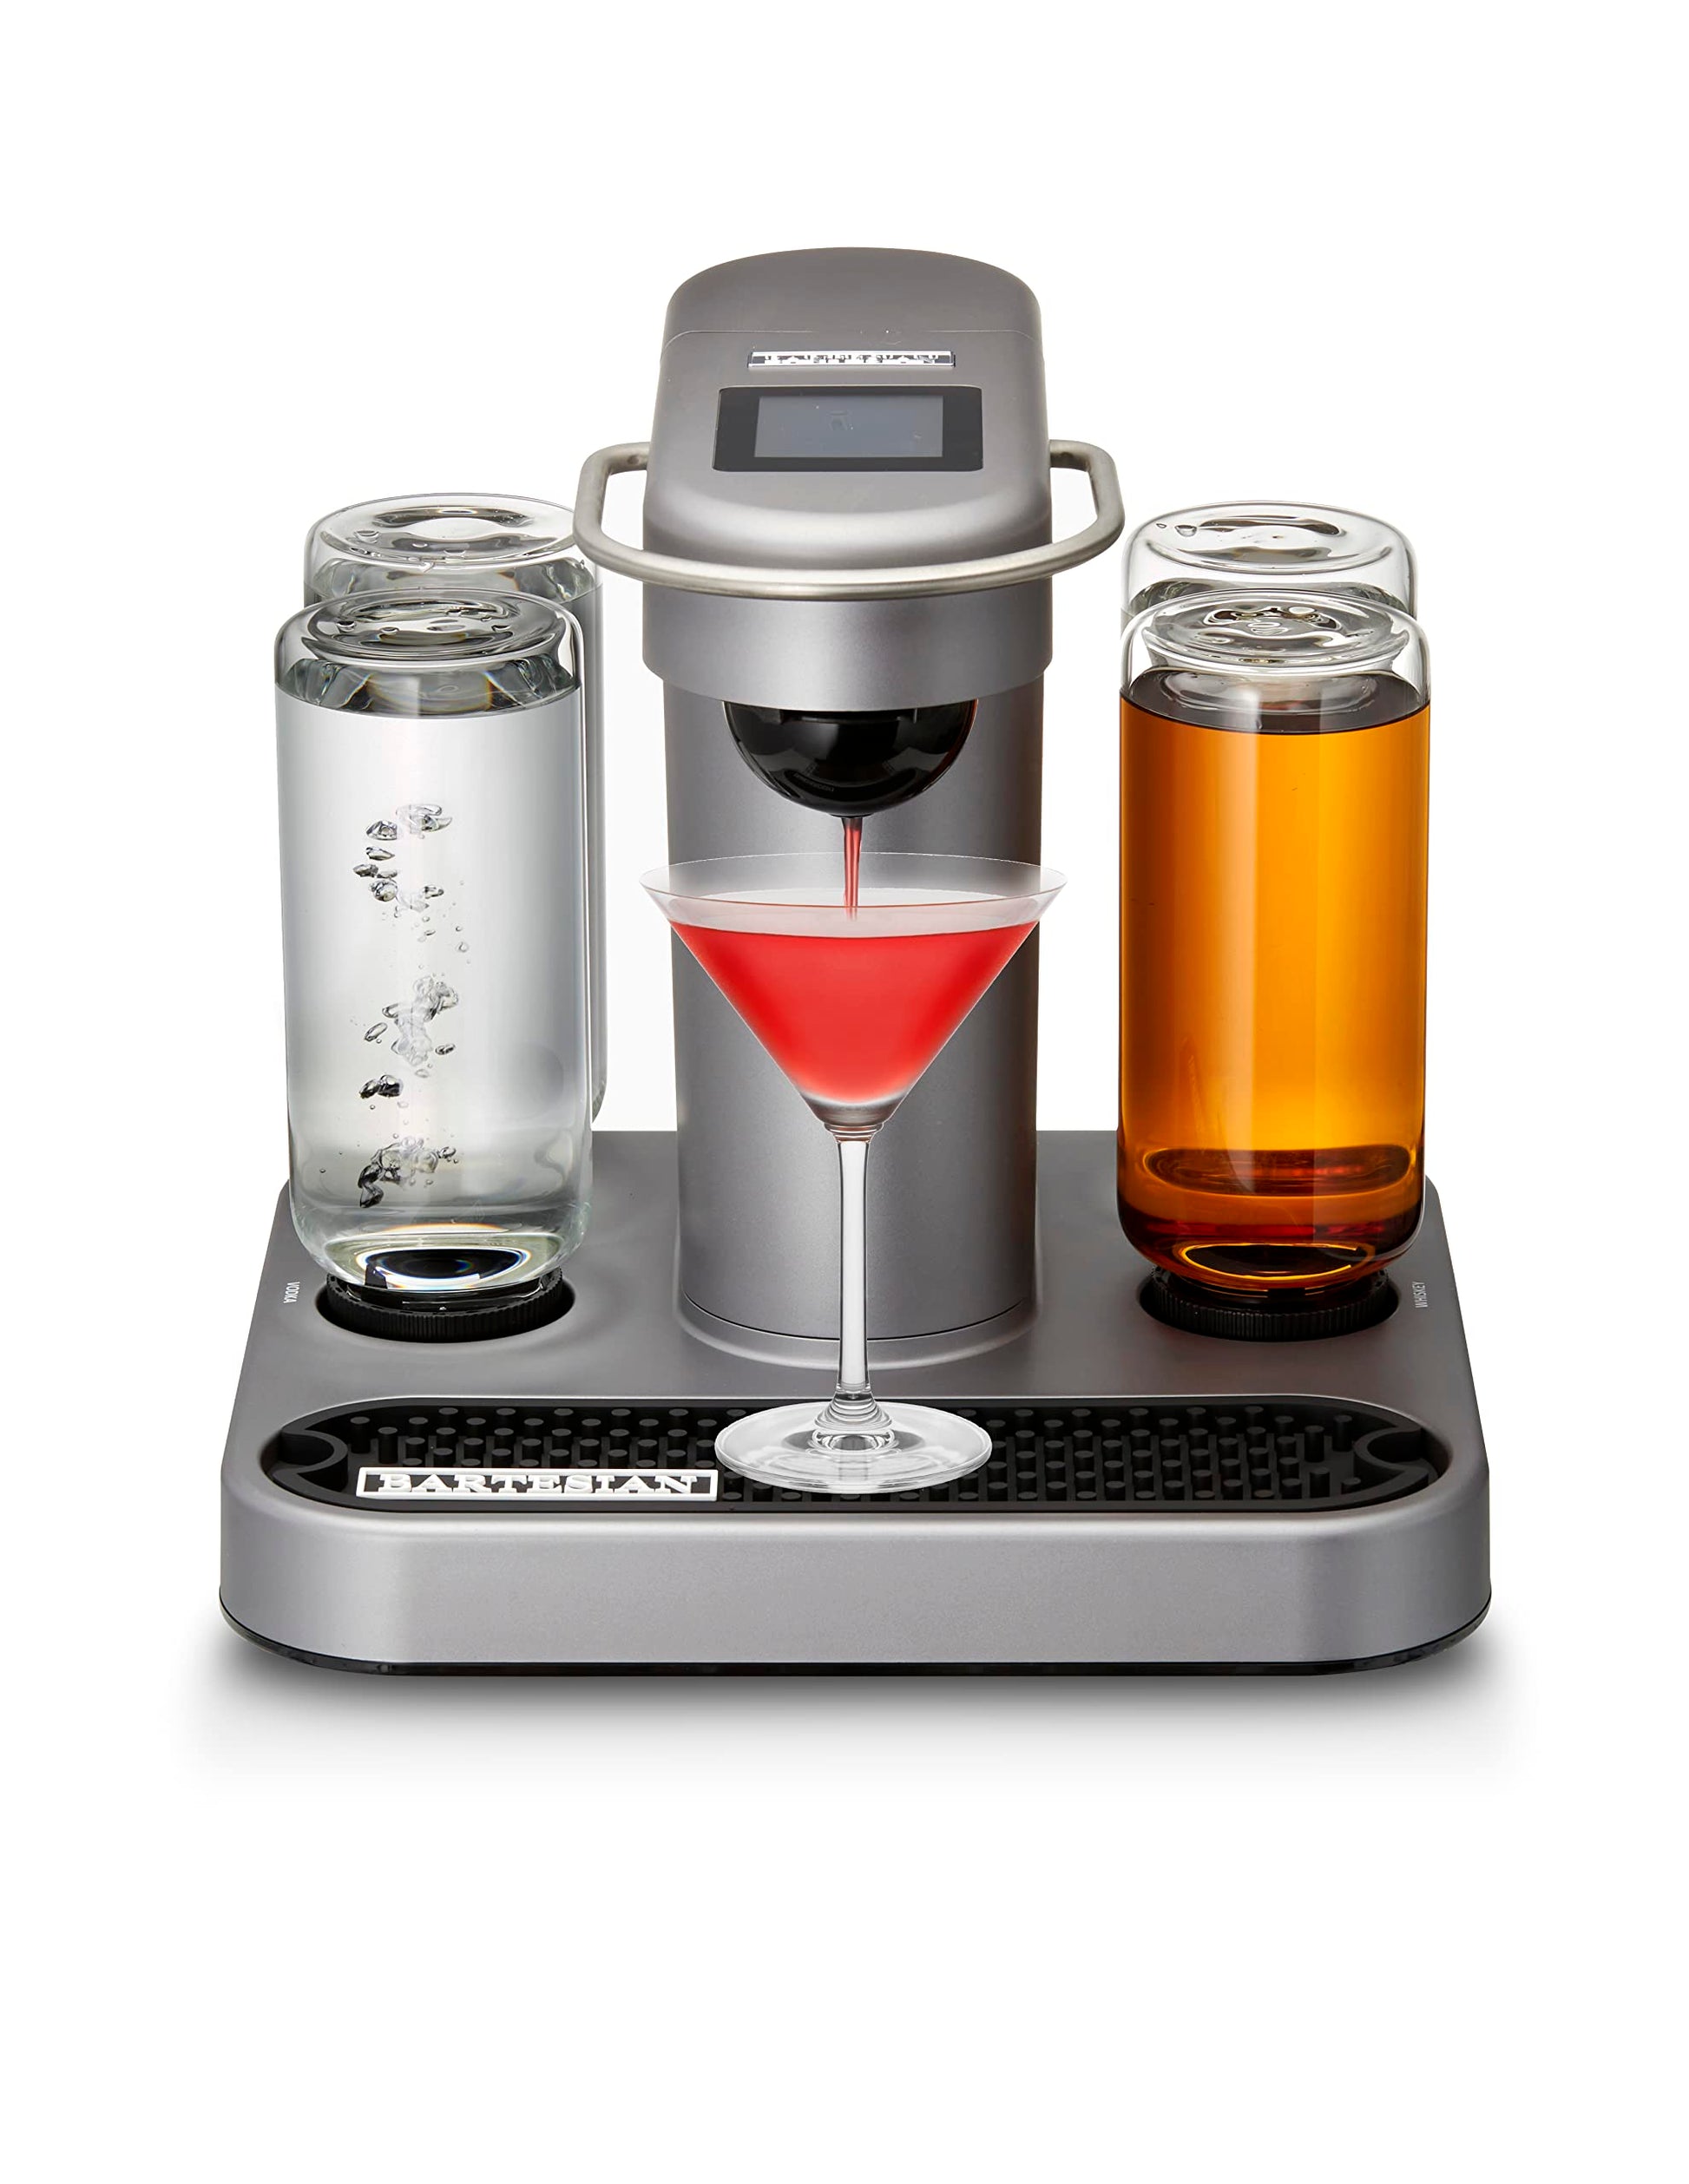 Bartesian Premium Cocktail and Margarita Machine for The Home  Bar with Push-Button Simplicity and an Easy to Clean Design (55300): Dining  & Entertaining